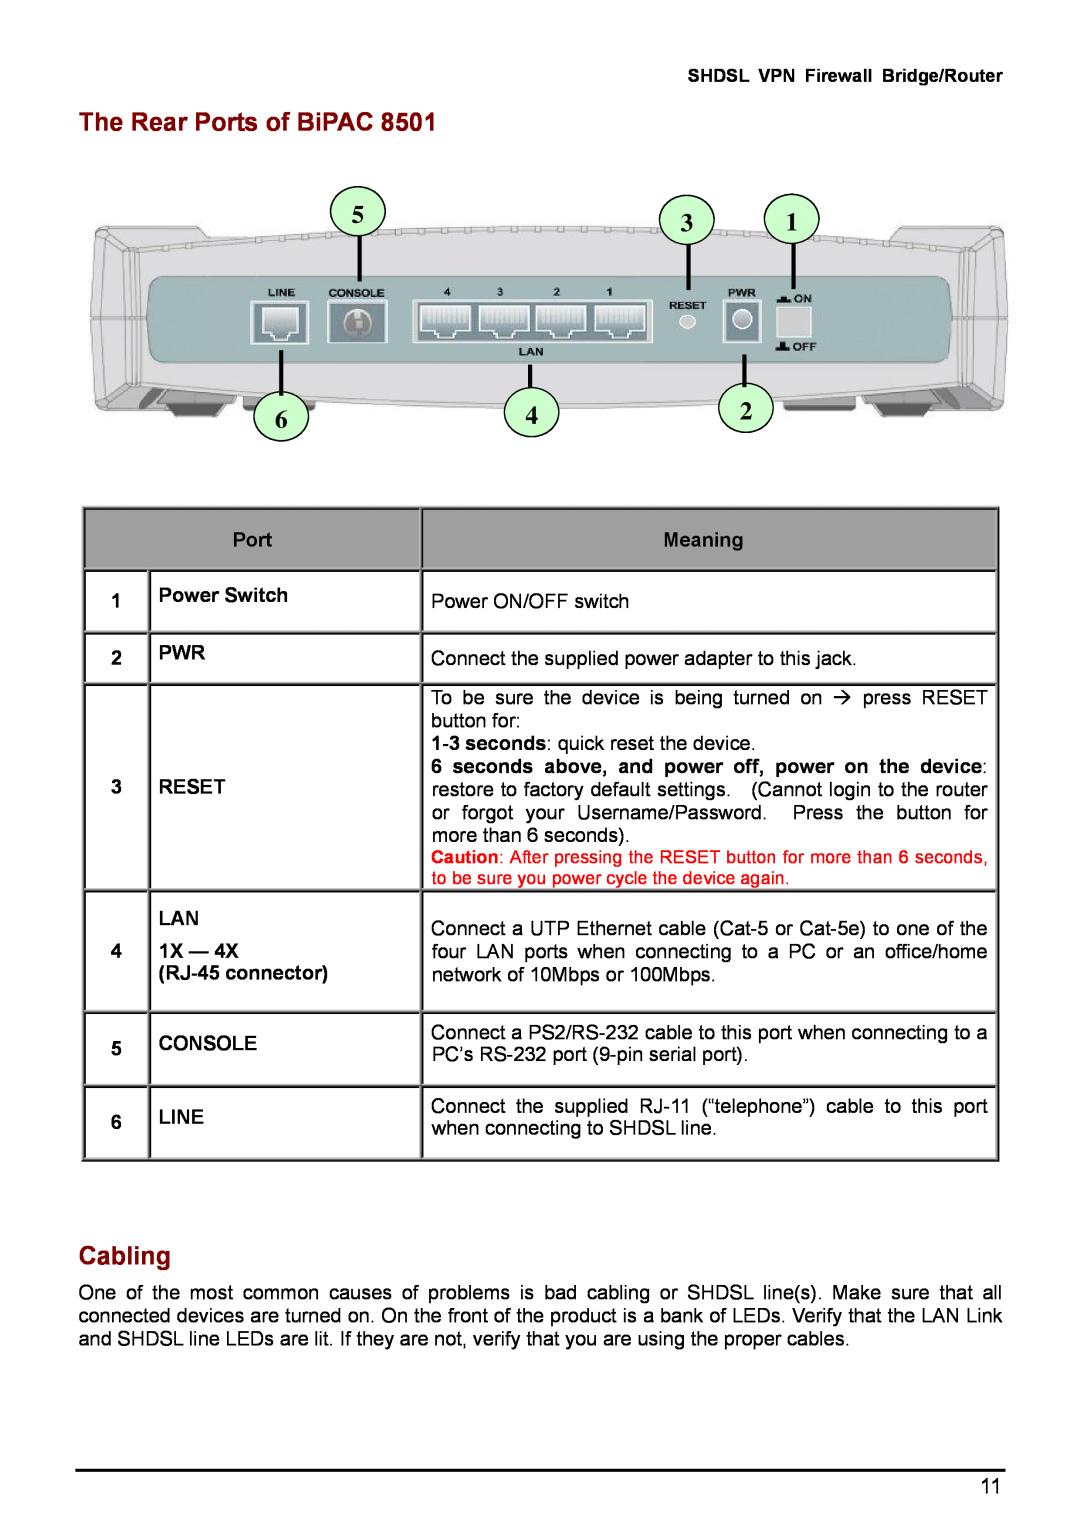 Billion Electric Company 8501 user manual The Rear Ports of BiPAC, Cabling, CONSOLE 6 LINE, Meaning 